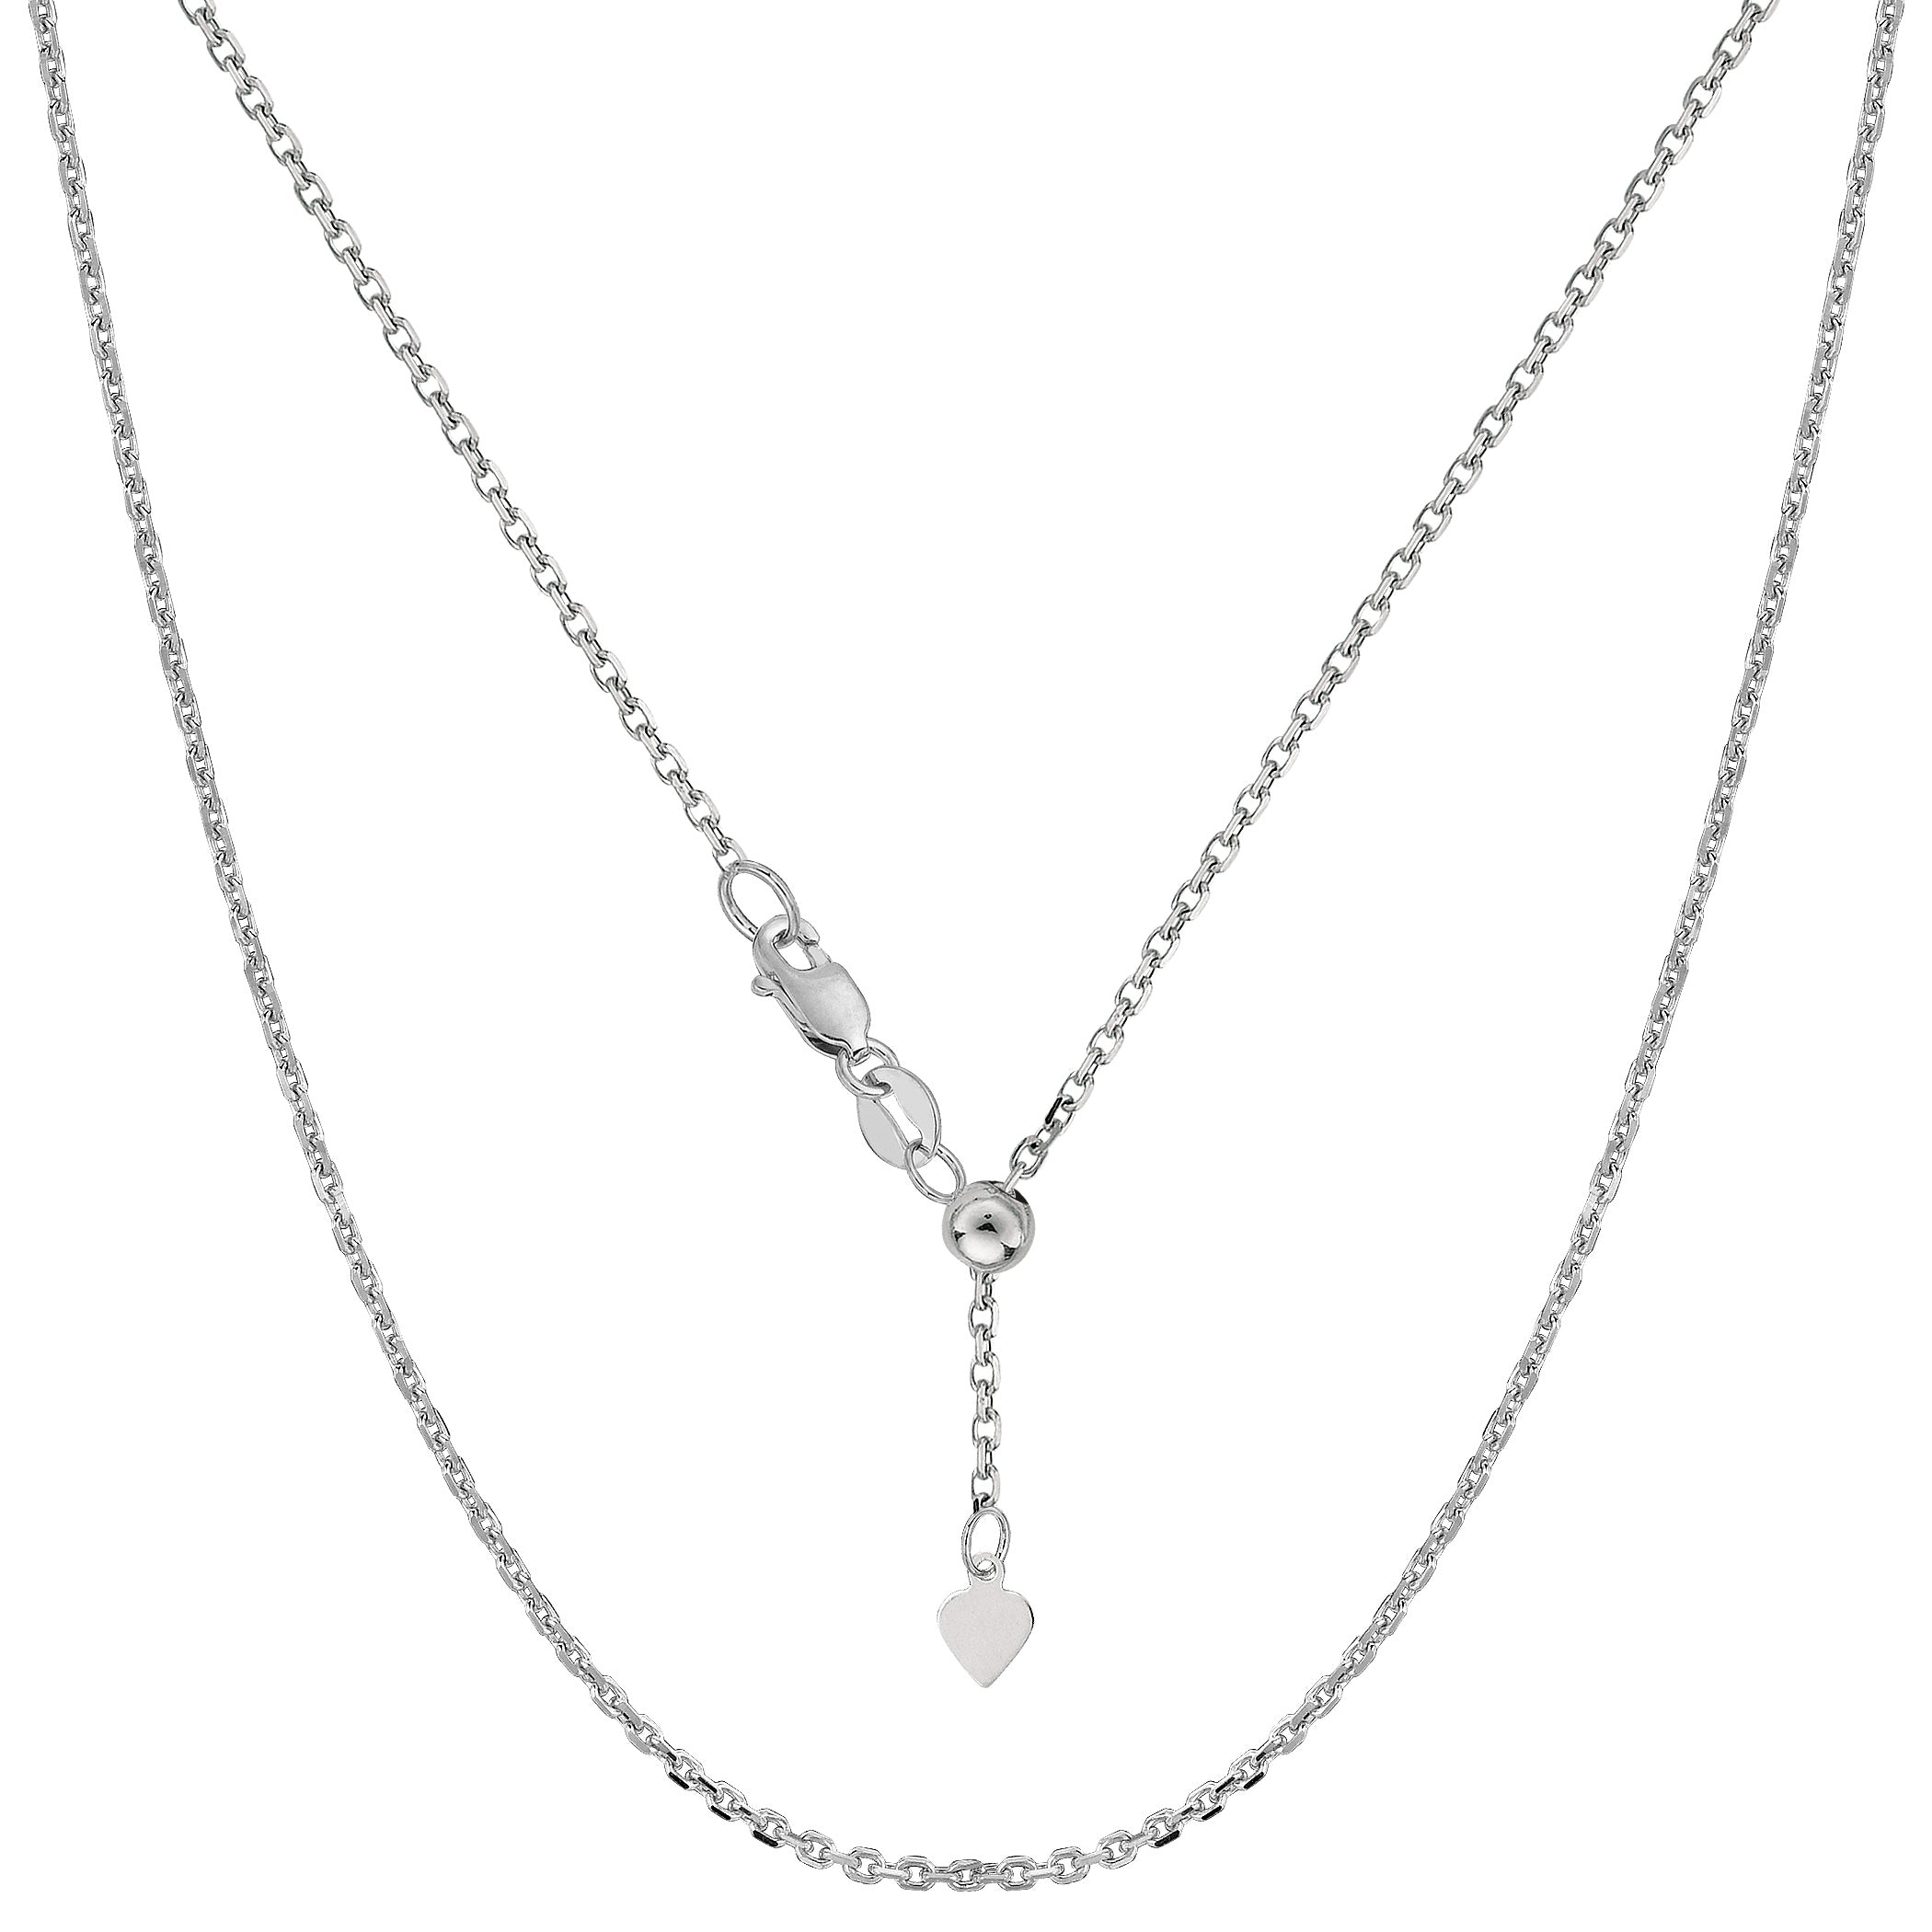 10k White Gold Adjustable Cable Link Chain Necklace, 0.9mm, 22" fine designer jewelry for men and women